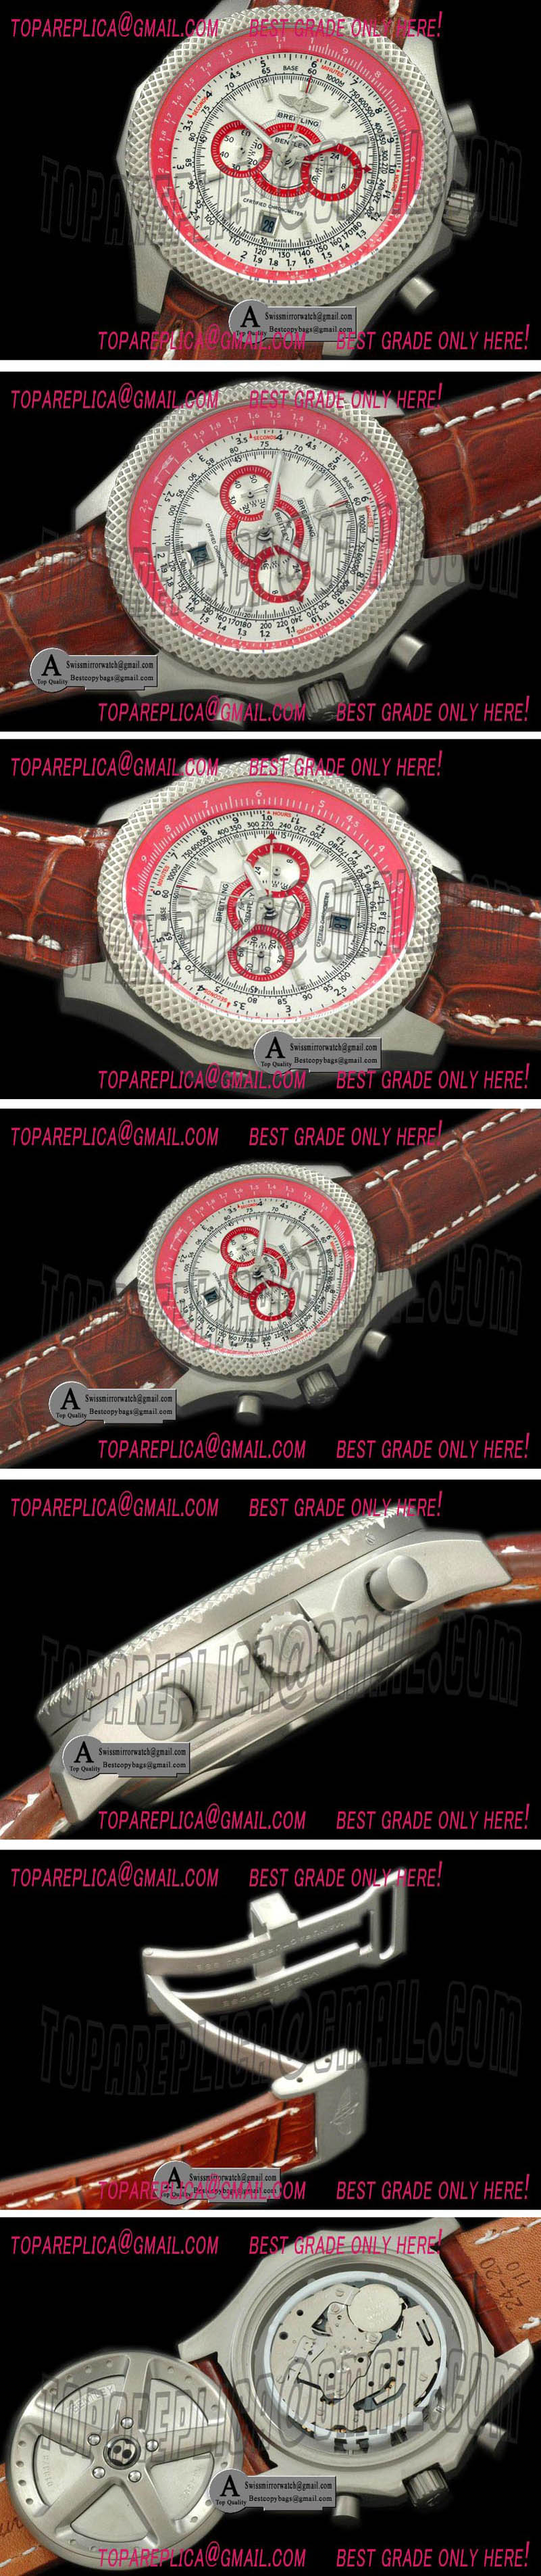 Breitling Bentley SuperSports Chrono SS/Leather White/Red Jap OS20 Qtz Replica Watches